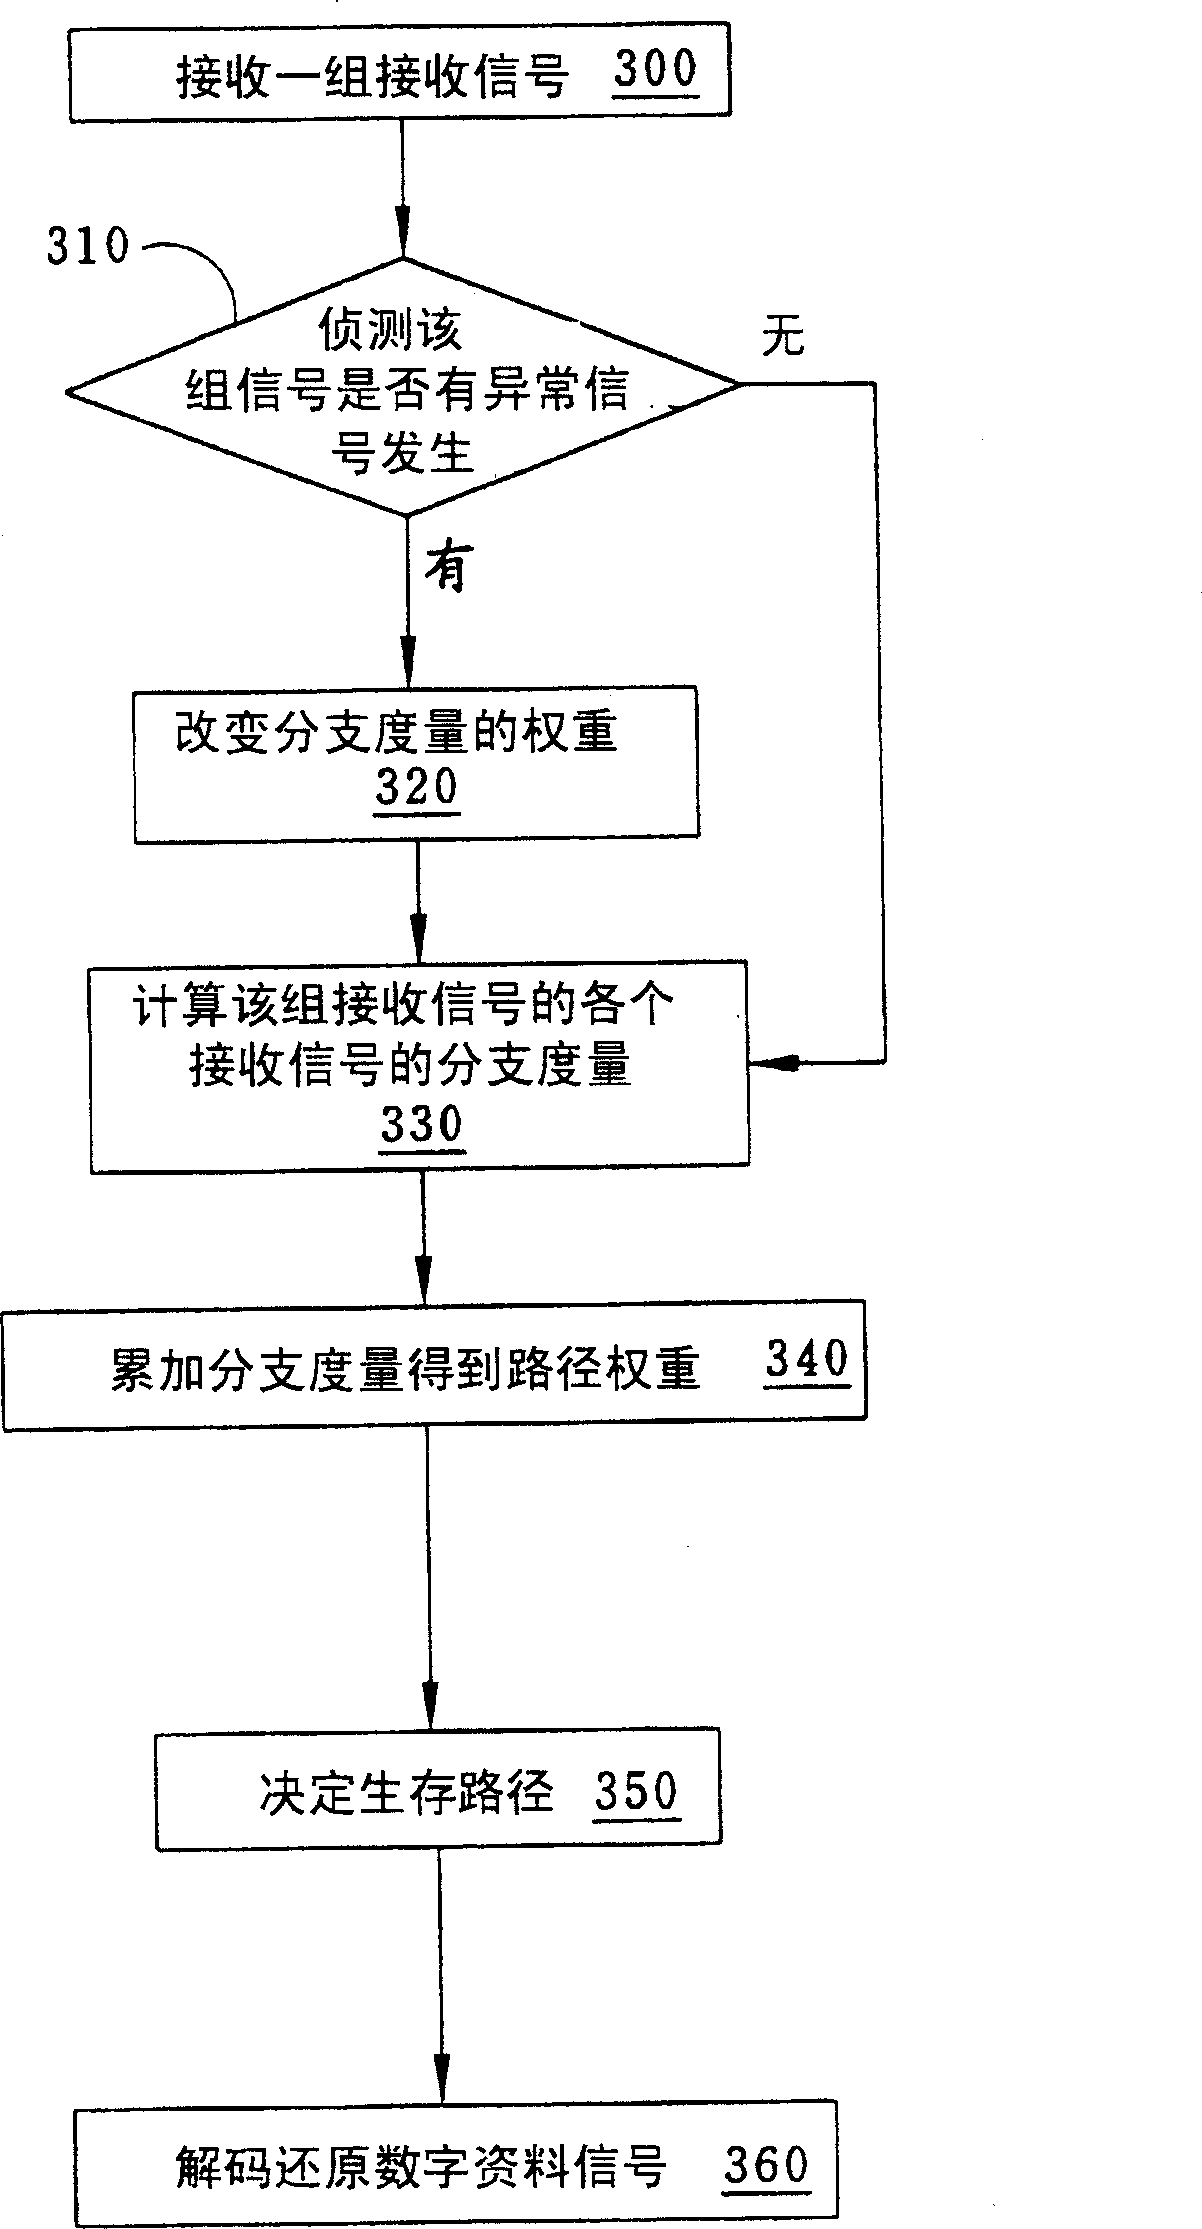 Method and system for regulating maximum probability detection